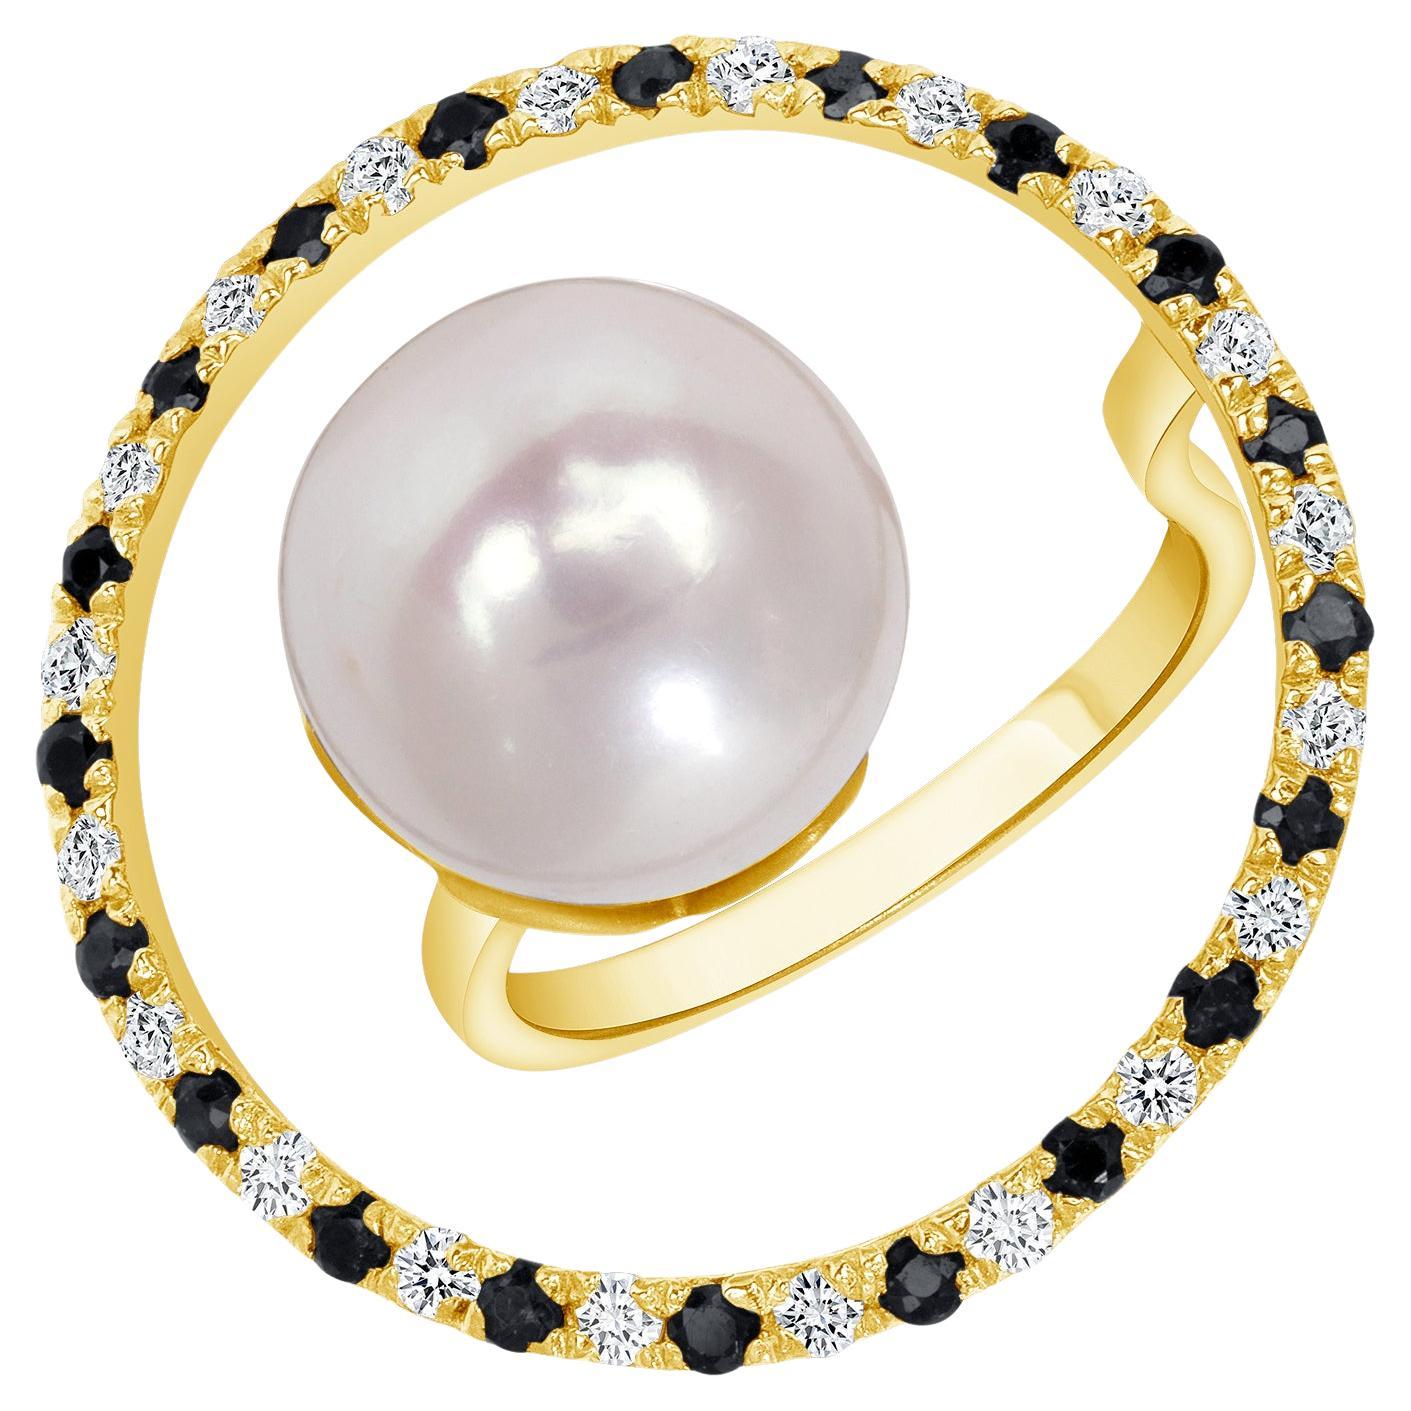 16 Carat Cultured Pearl, Sapphire, Diamond, and Yellow Gold Cocktail Ring